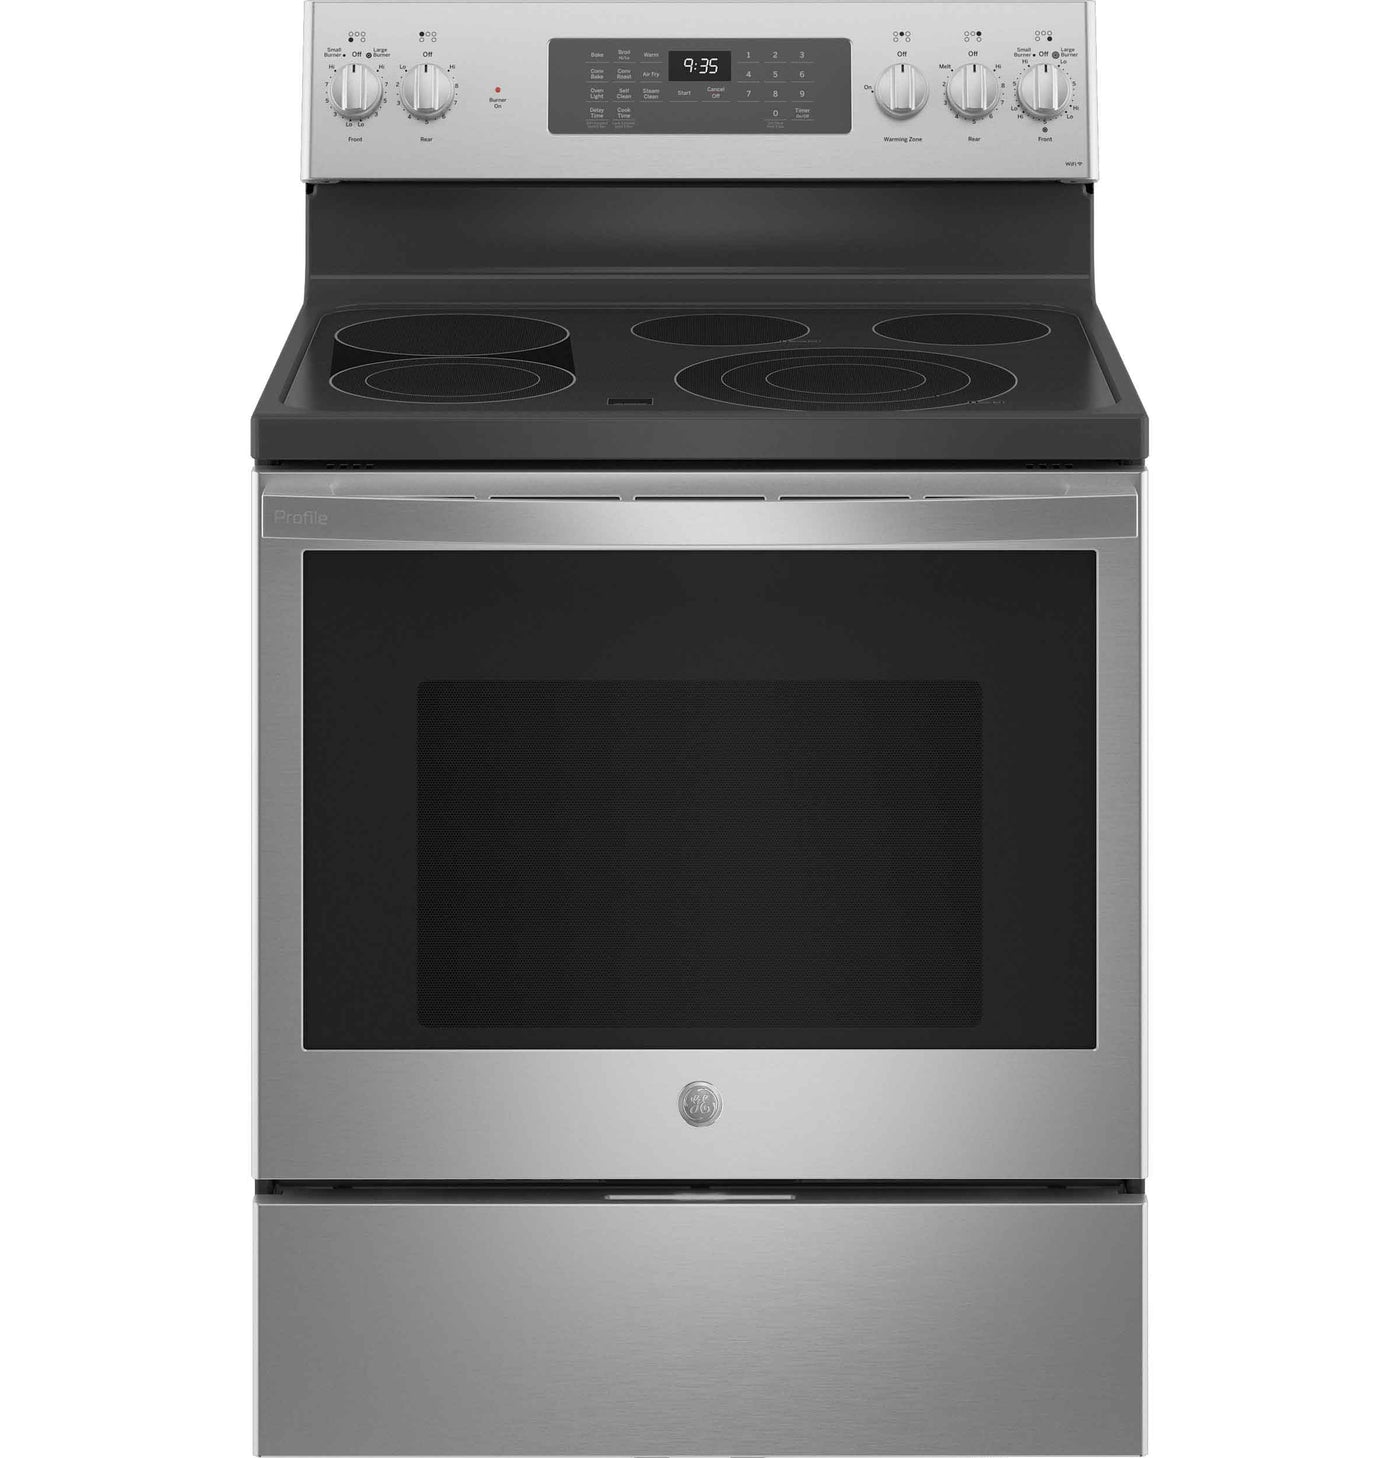 GE Profile Fingerprint Resistant Stainless Steel 30" Free Standing Electric Range with Air Fry (5.3 Cu.Ft) - PB935YPFS